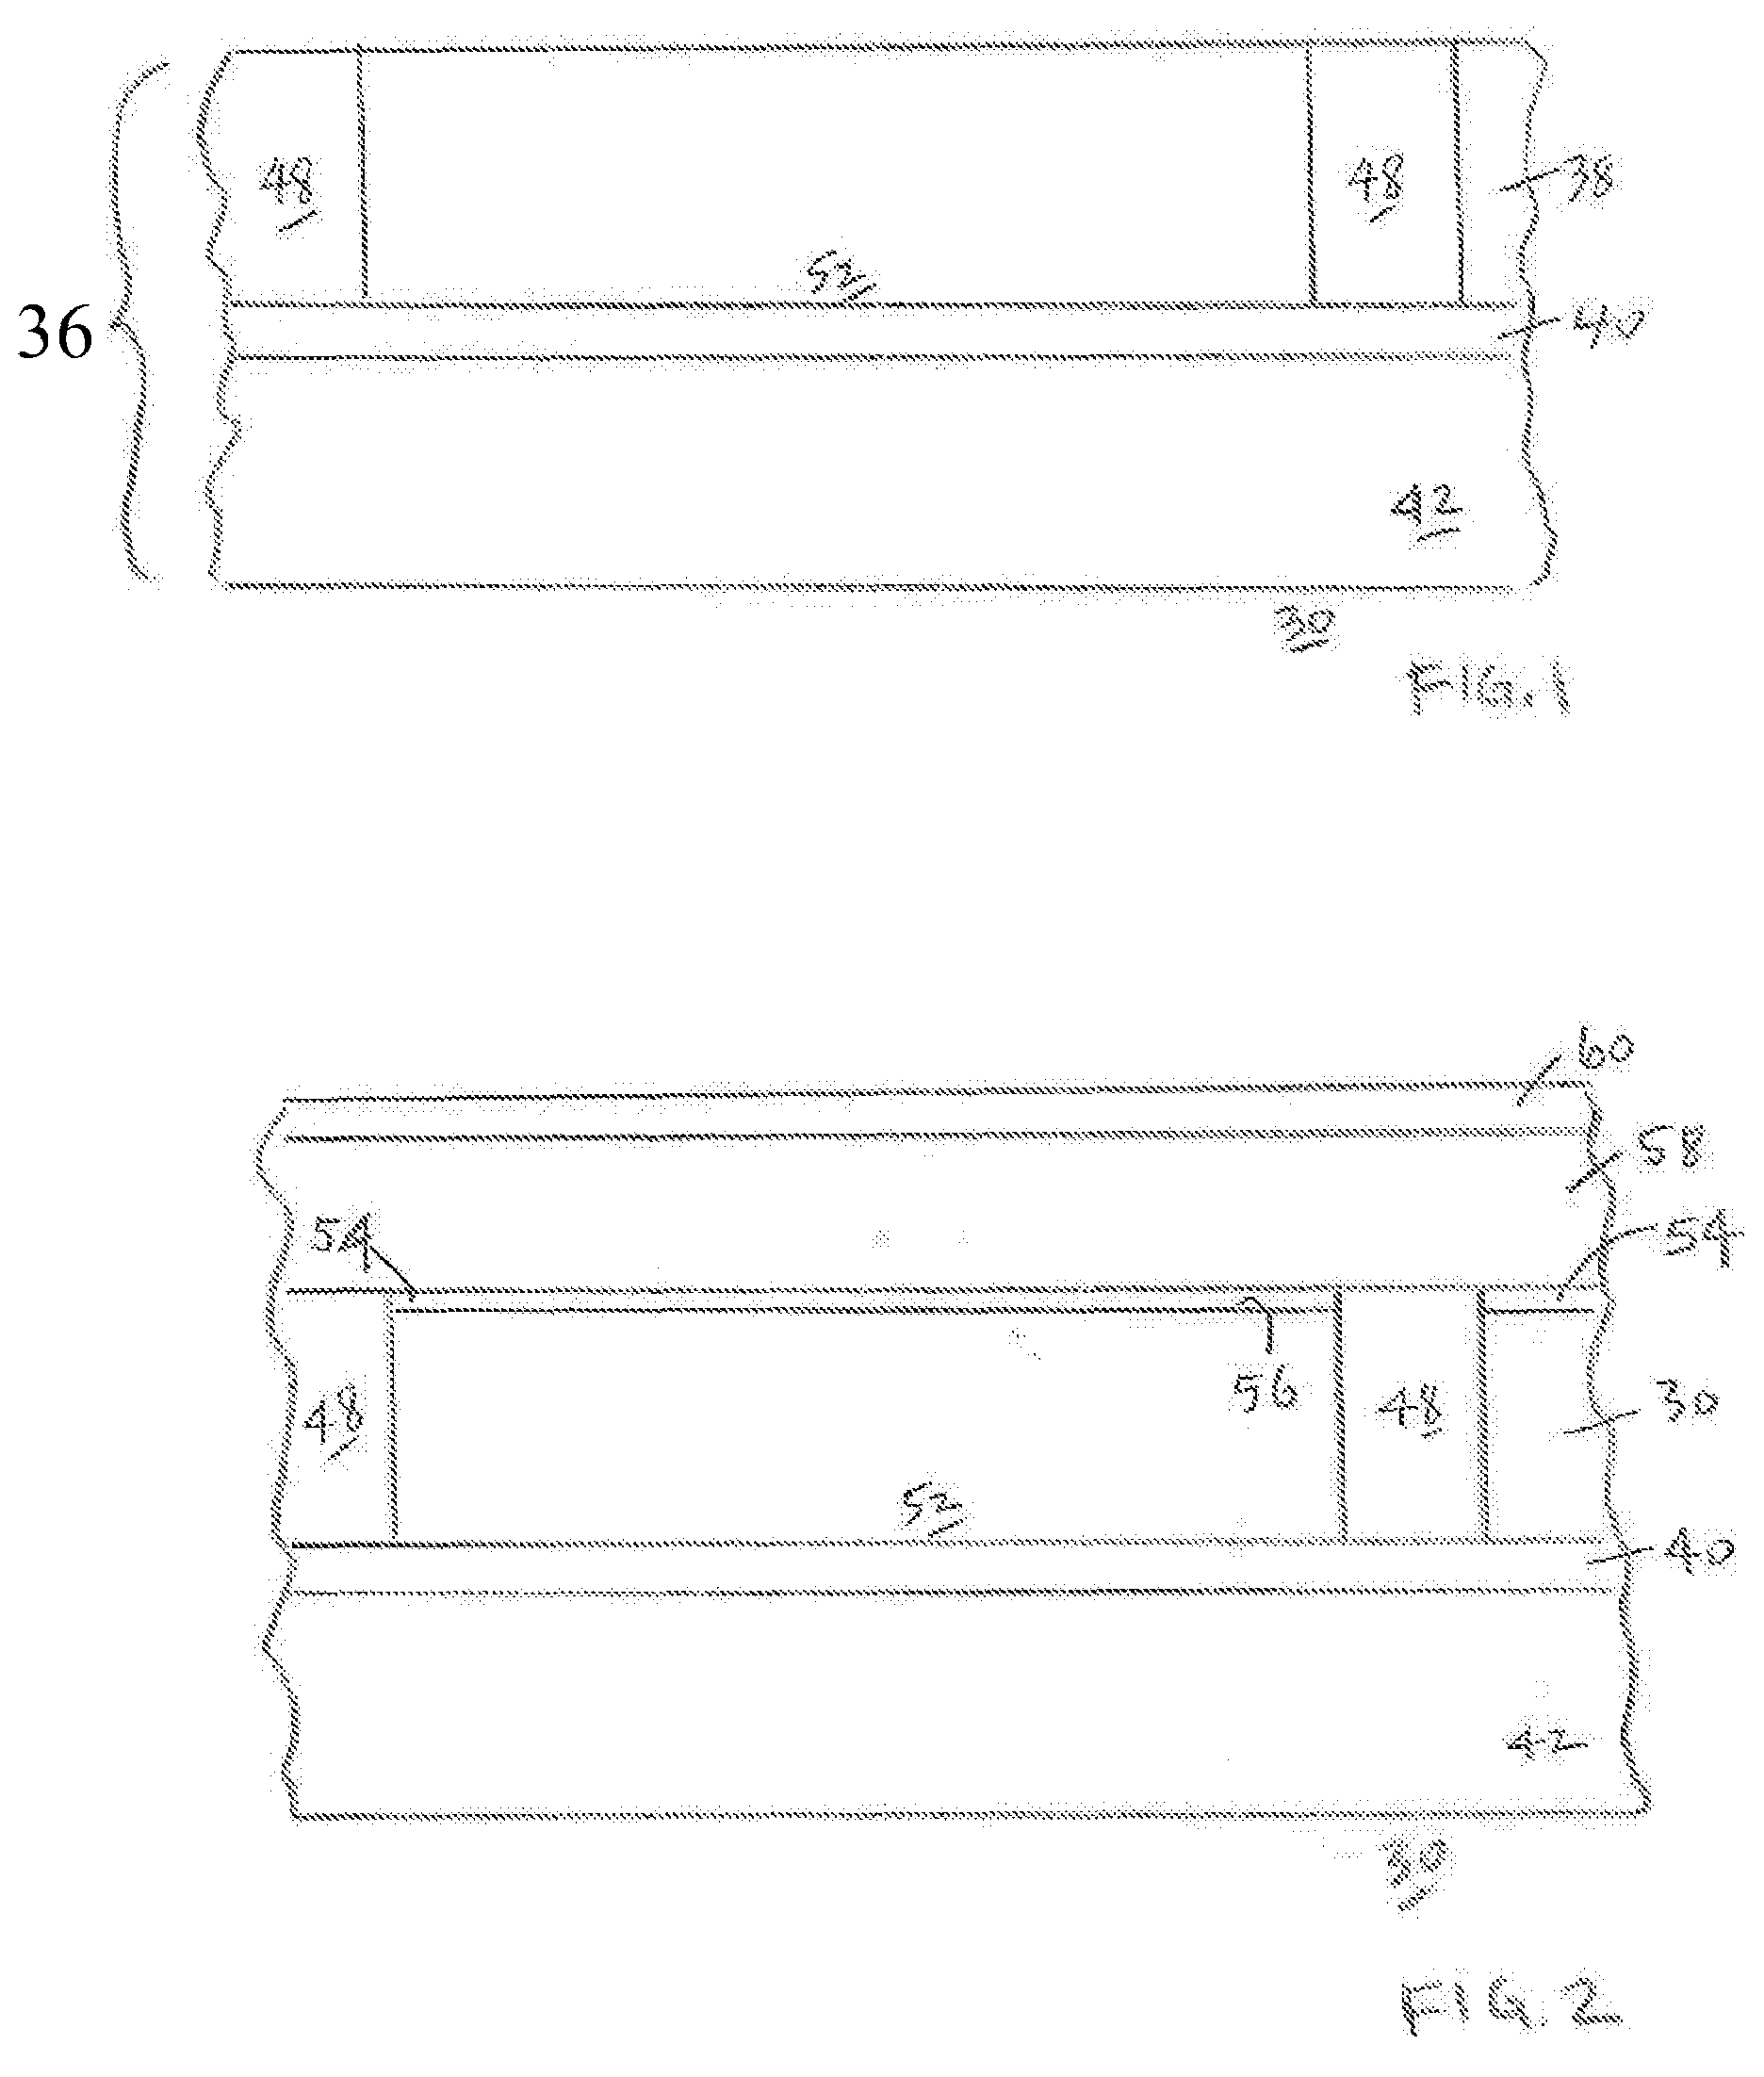 Stress enhanced mos transistor and methods for its fabrication